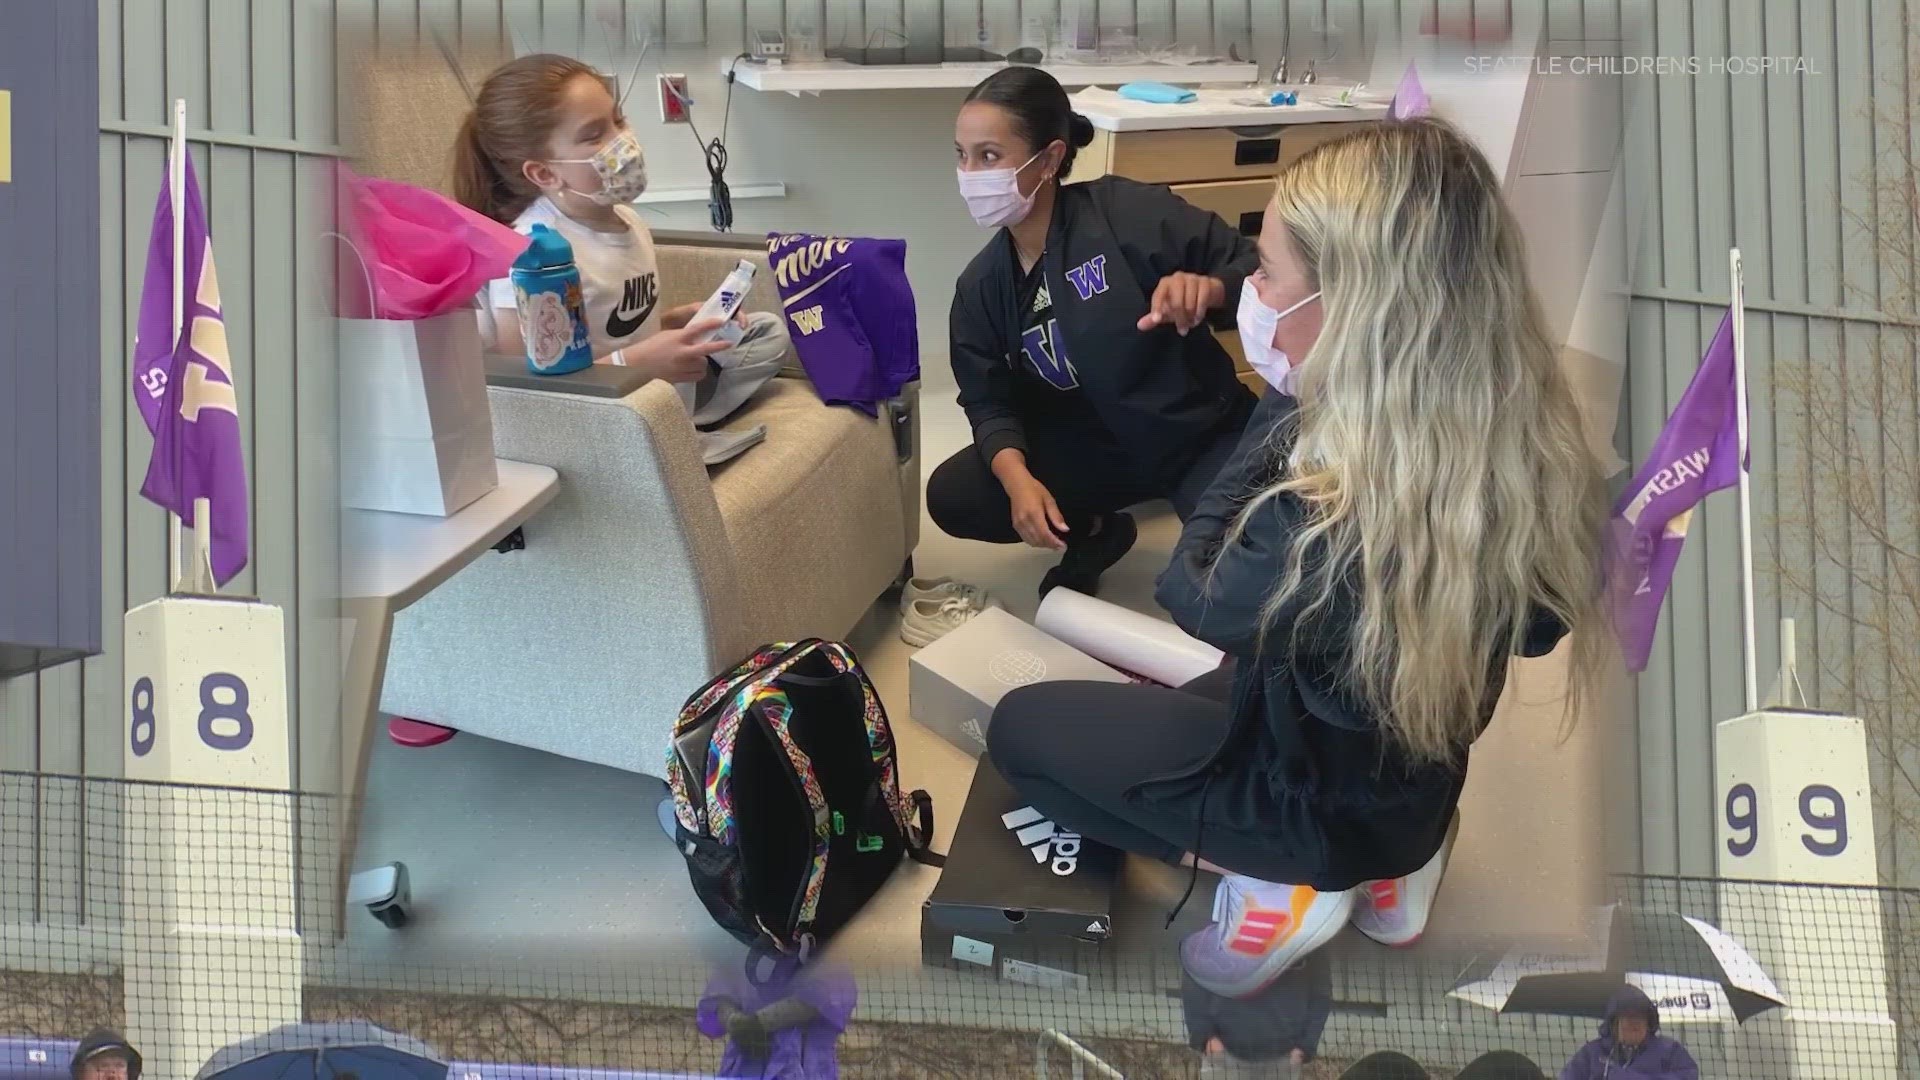 An 11-year-old girl says she's inspired by the University of Washington softball players, but the athletes say they’re inspired by her.